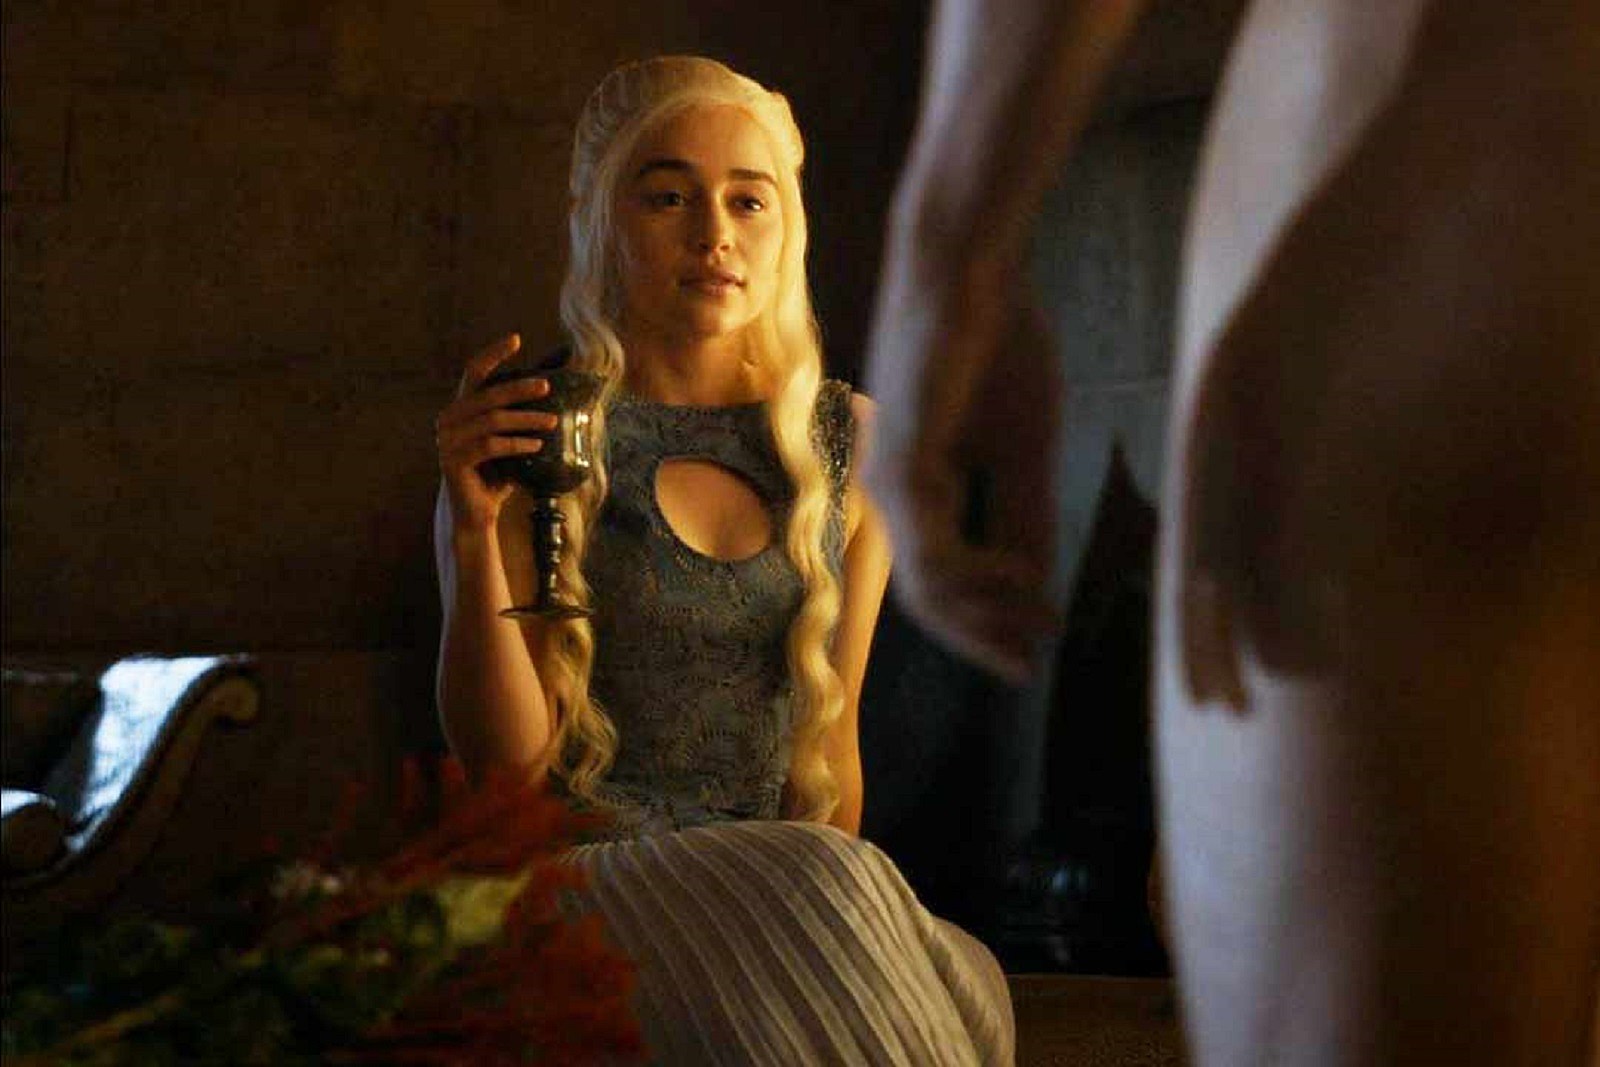 Boomer recommend best of Sex Scene Compilation Game of Thrones HD Season 5.